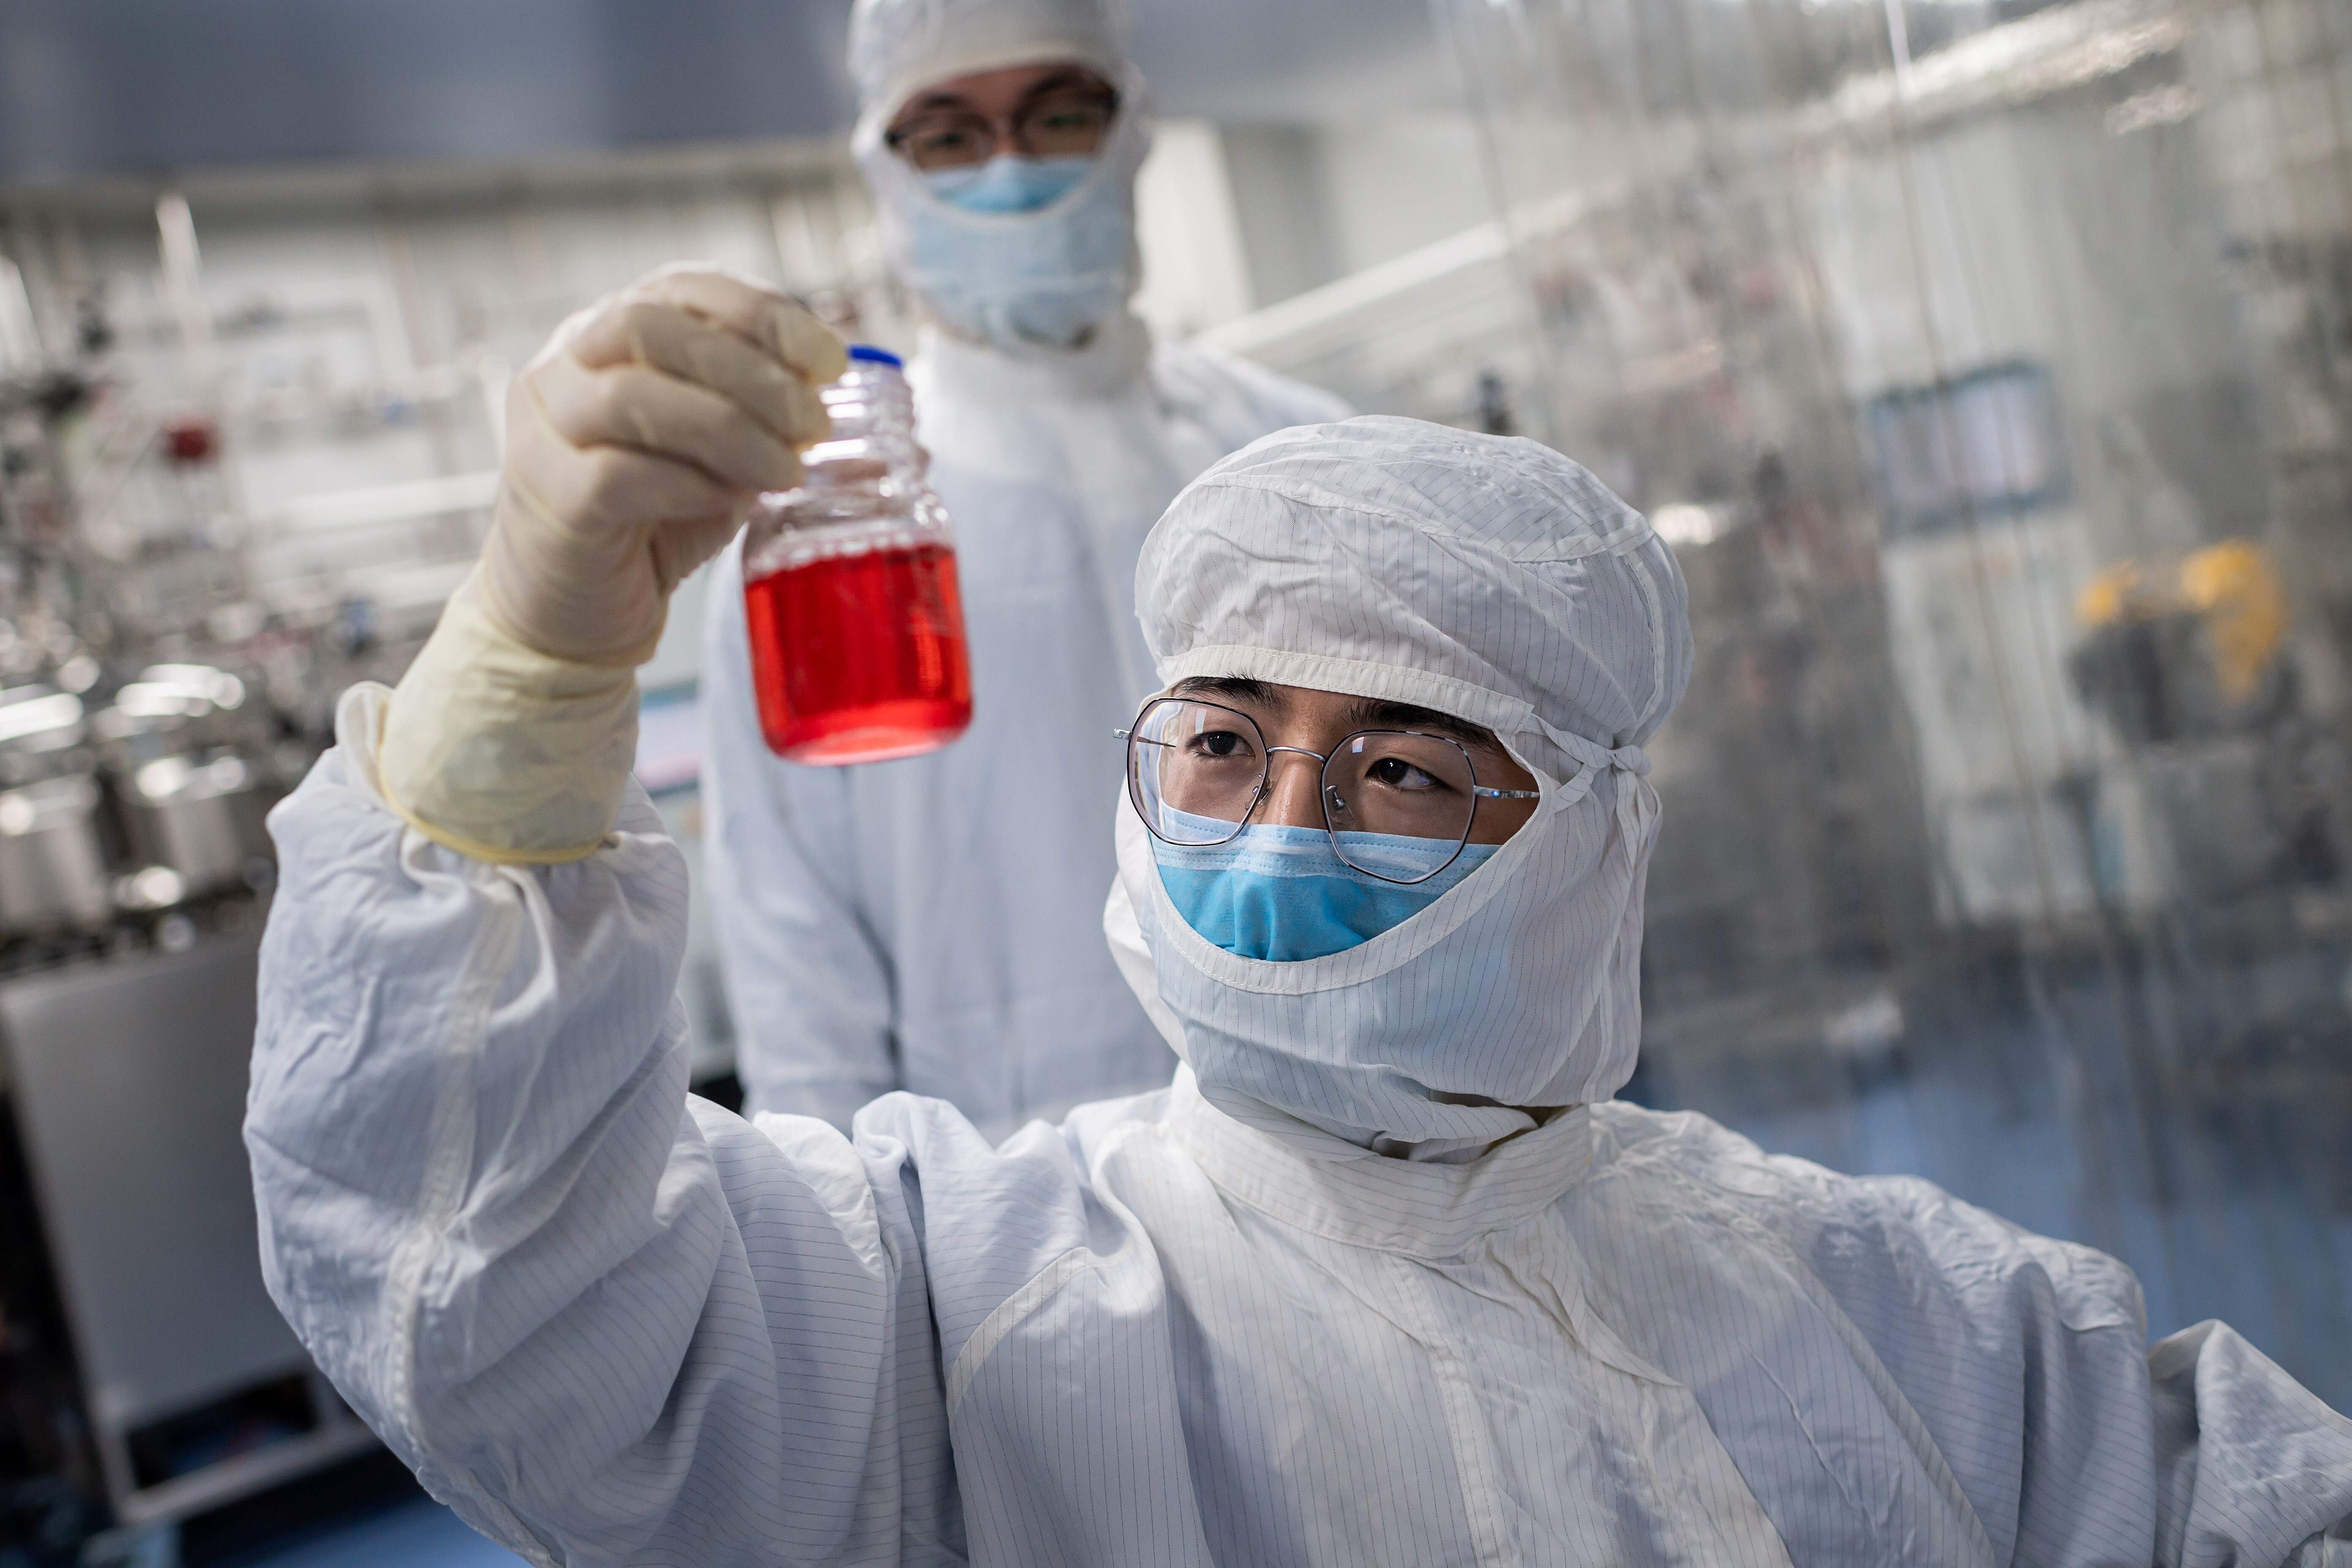 Beijing says it will boost investment in biotech and vaccine development under its new “strategic emerging industries” plan. Photo: AFP